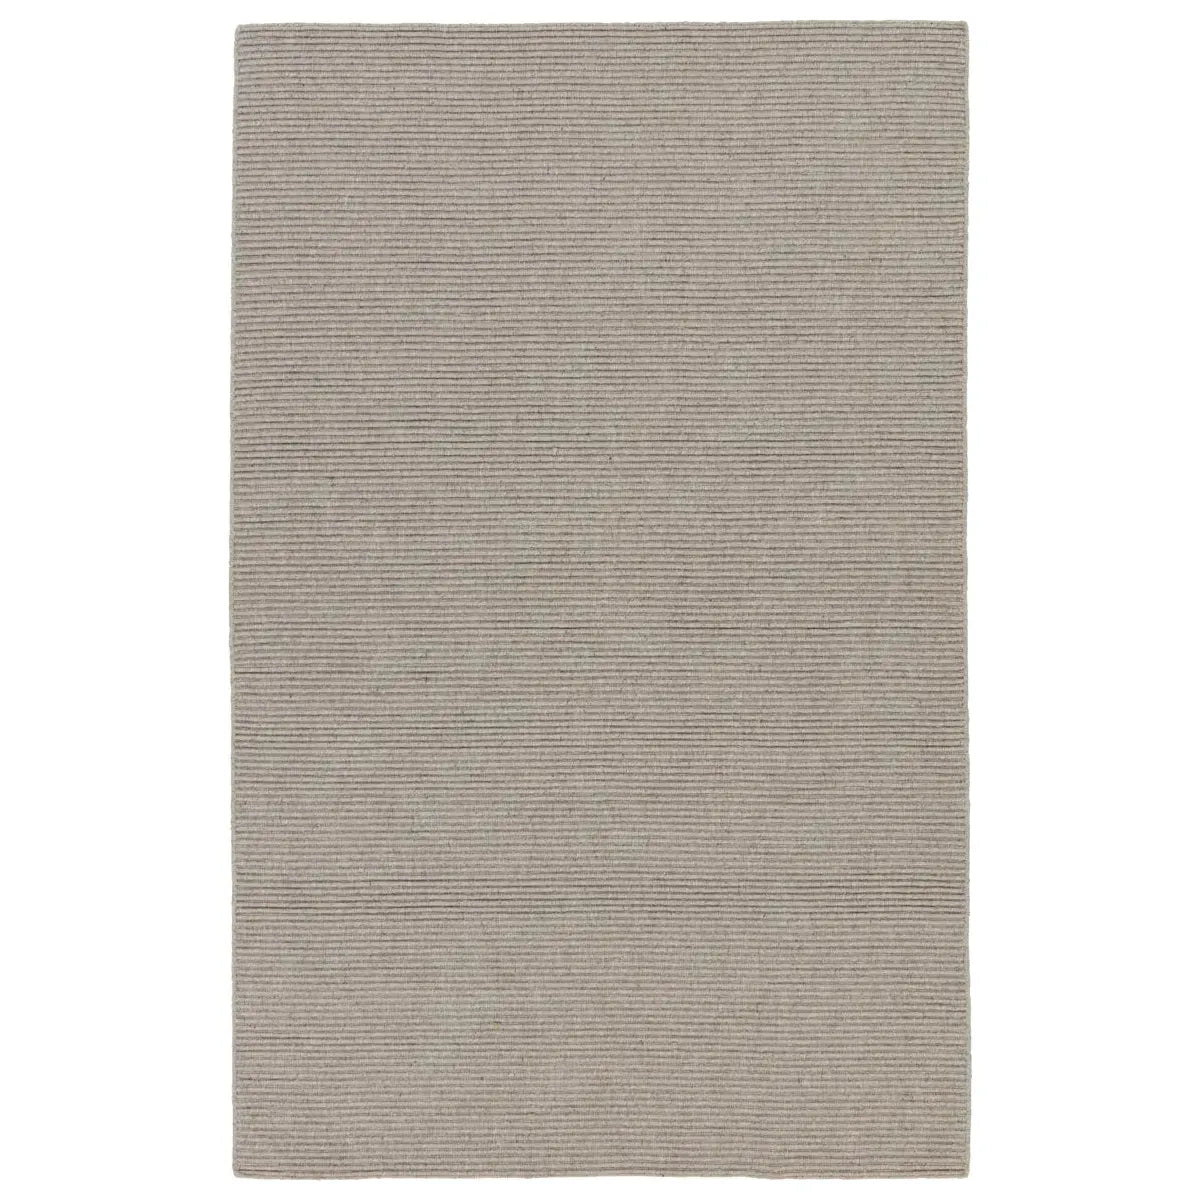 The Strada Shyre Morn Rug features a unique texture and casual comfort that effortlessly grounds spaces with a solid hue. This handwoven wool rug is crafted from undyed yarn for a distinctive, neutral colorway with natural variation for a bit of dimension. Amethyst Home provides interior design services, furniture, rugs, and lighting in the Miamimetro area.